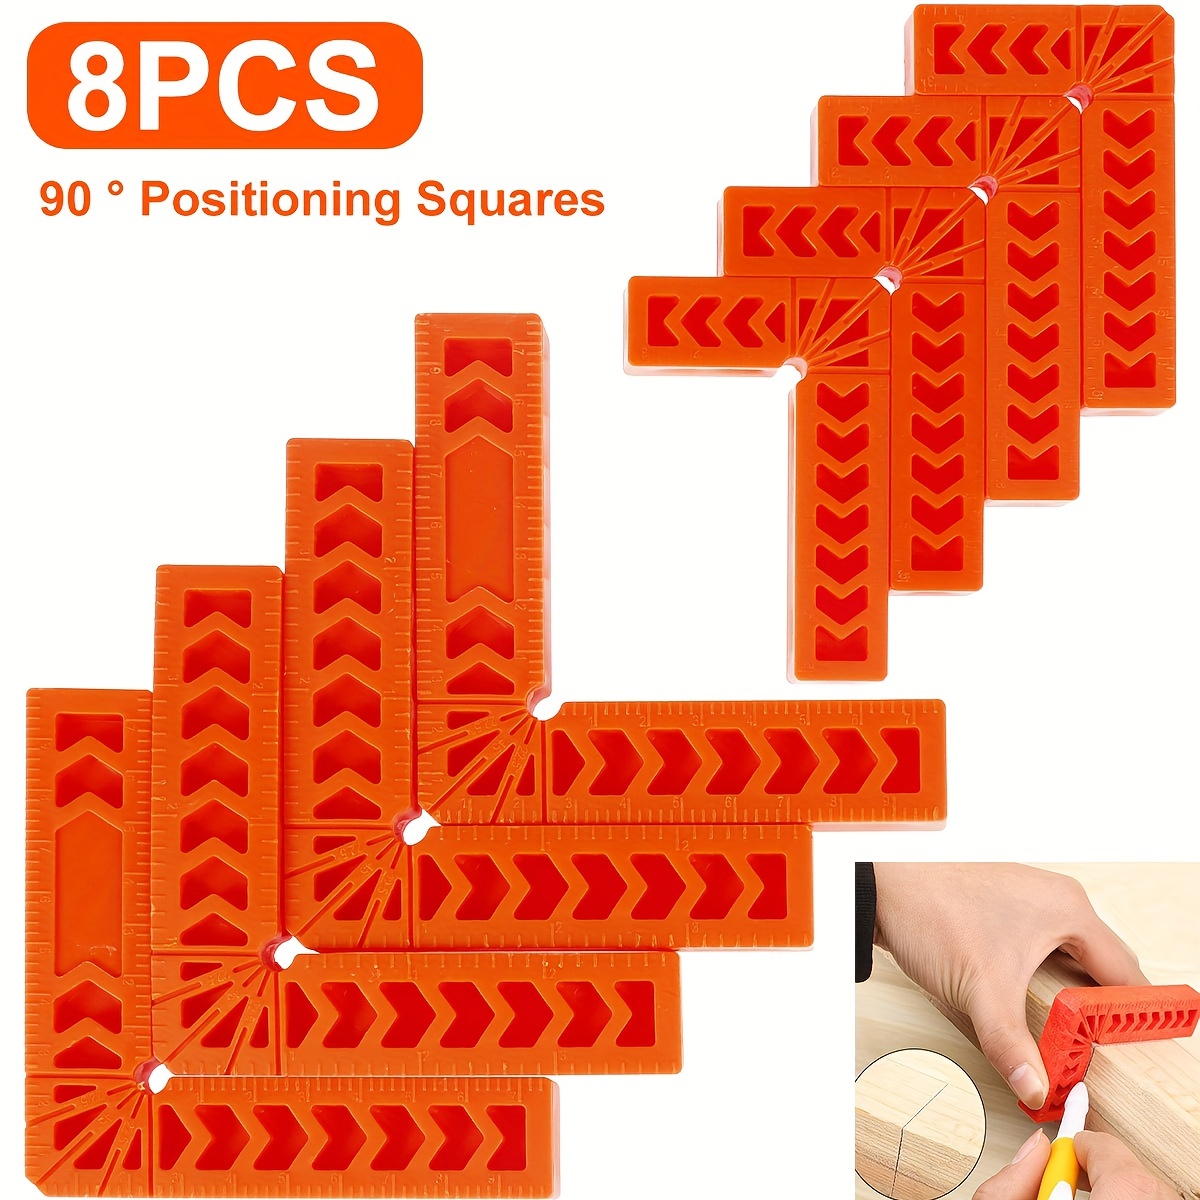 Plastic 90 Degree Right Angle Blocks,2pcs 90 Degree Positioning Squares  Right Angle Clamp Woodworking Carpenter Corner Clamping Tool(red)